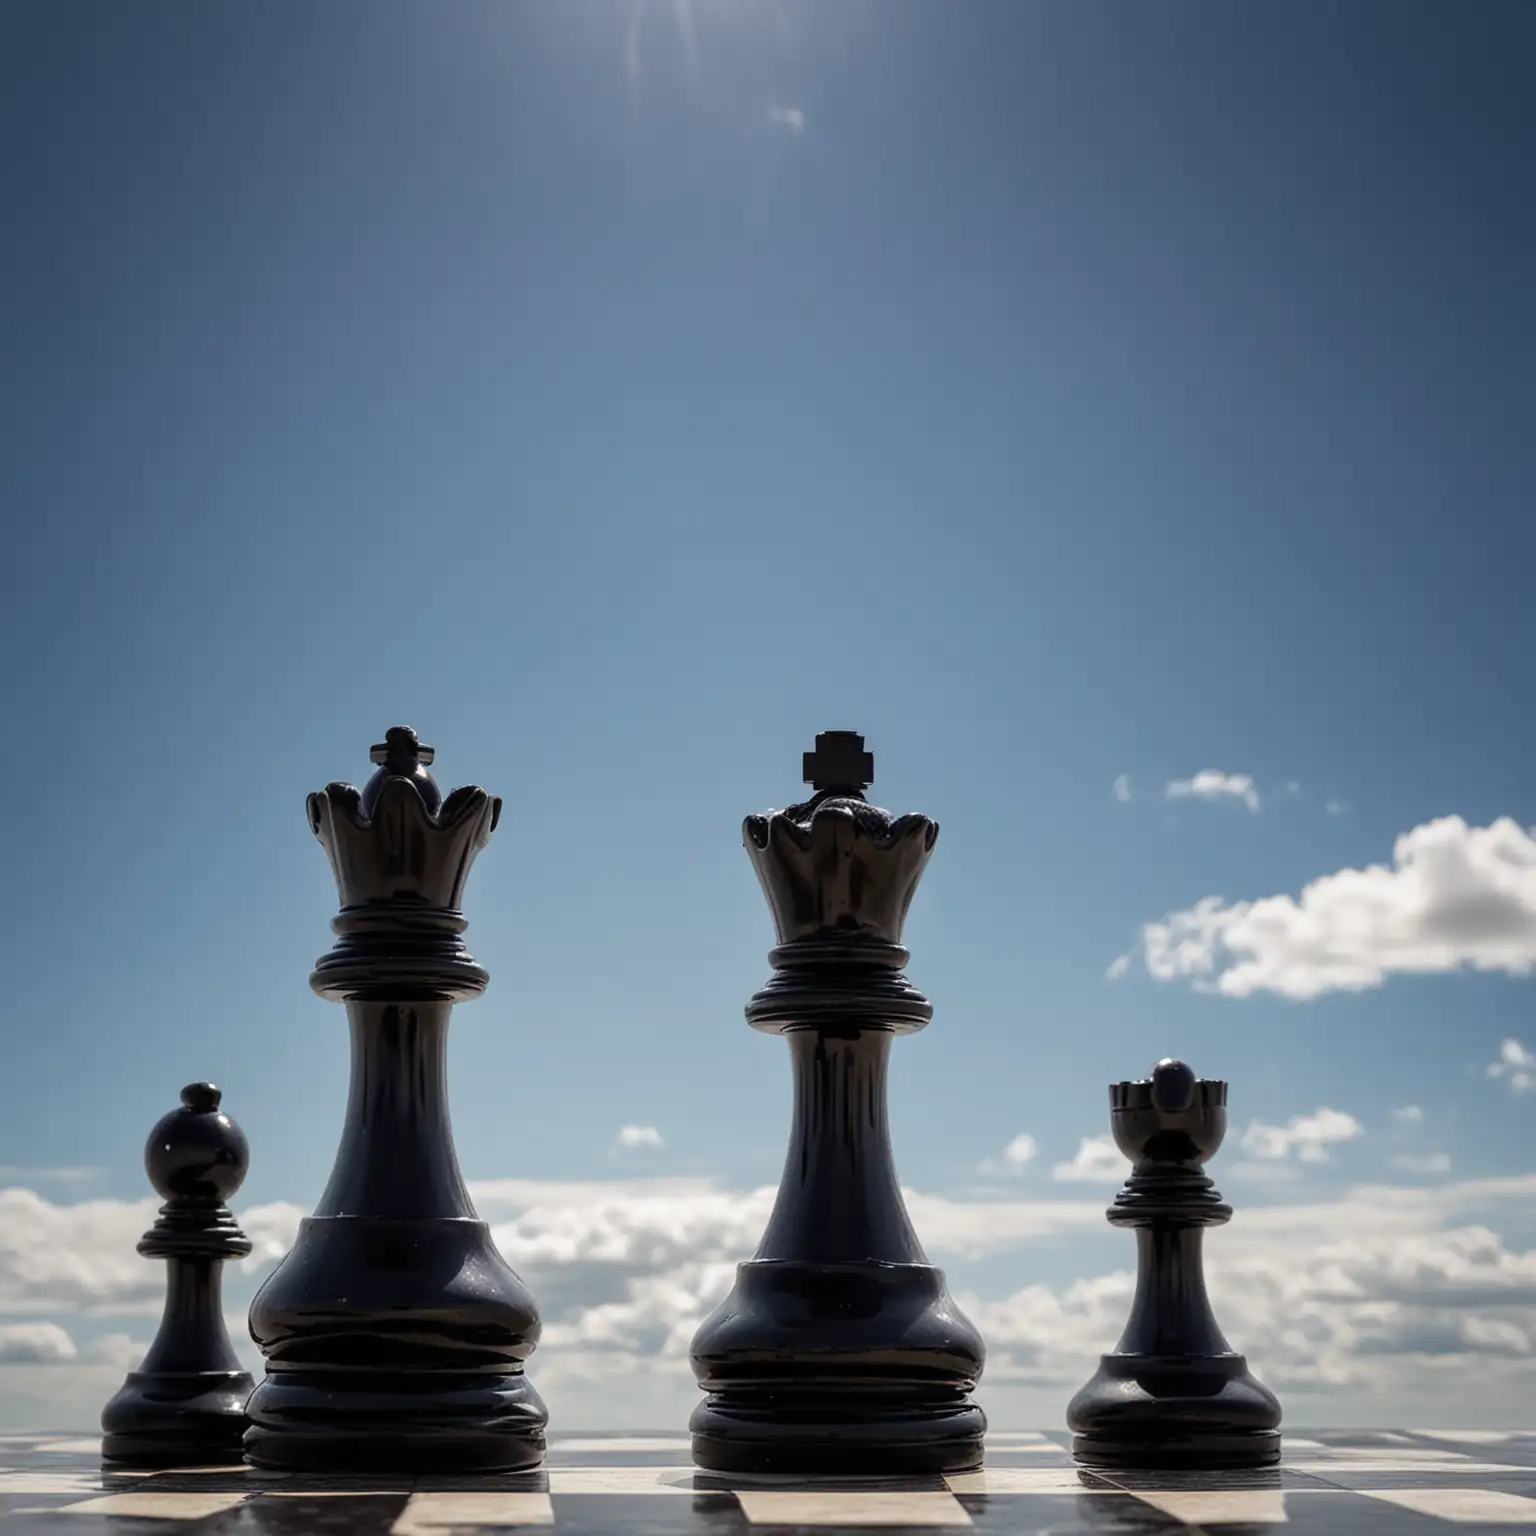 Black Chess Pawn Against Blue Cloudy Sky